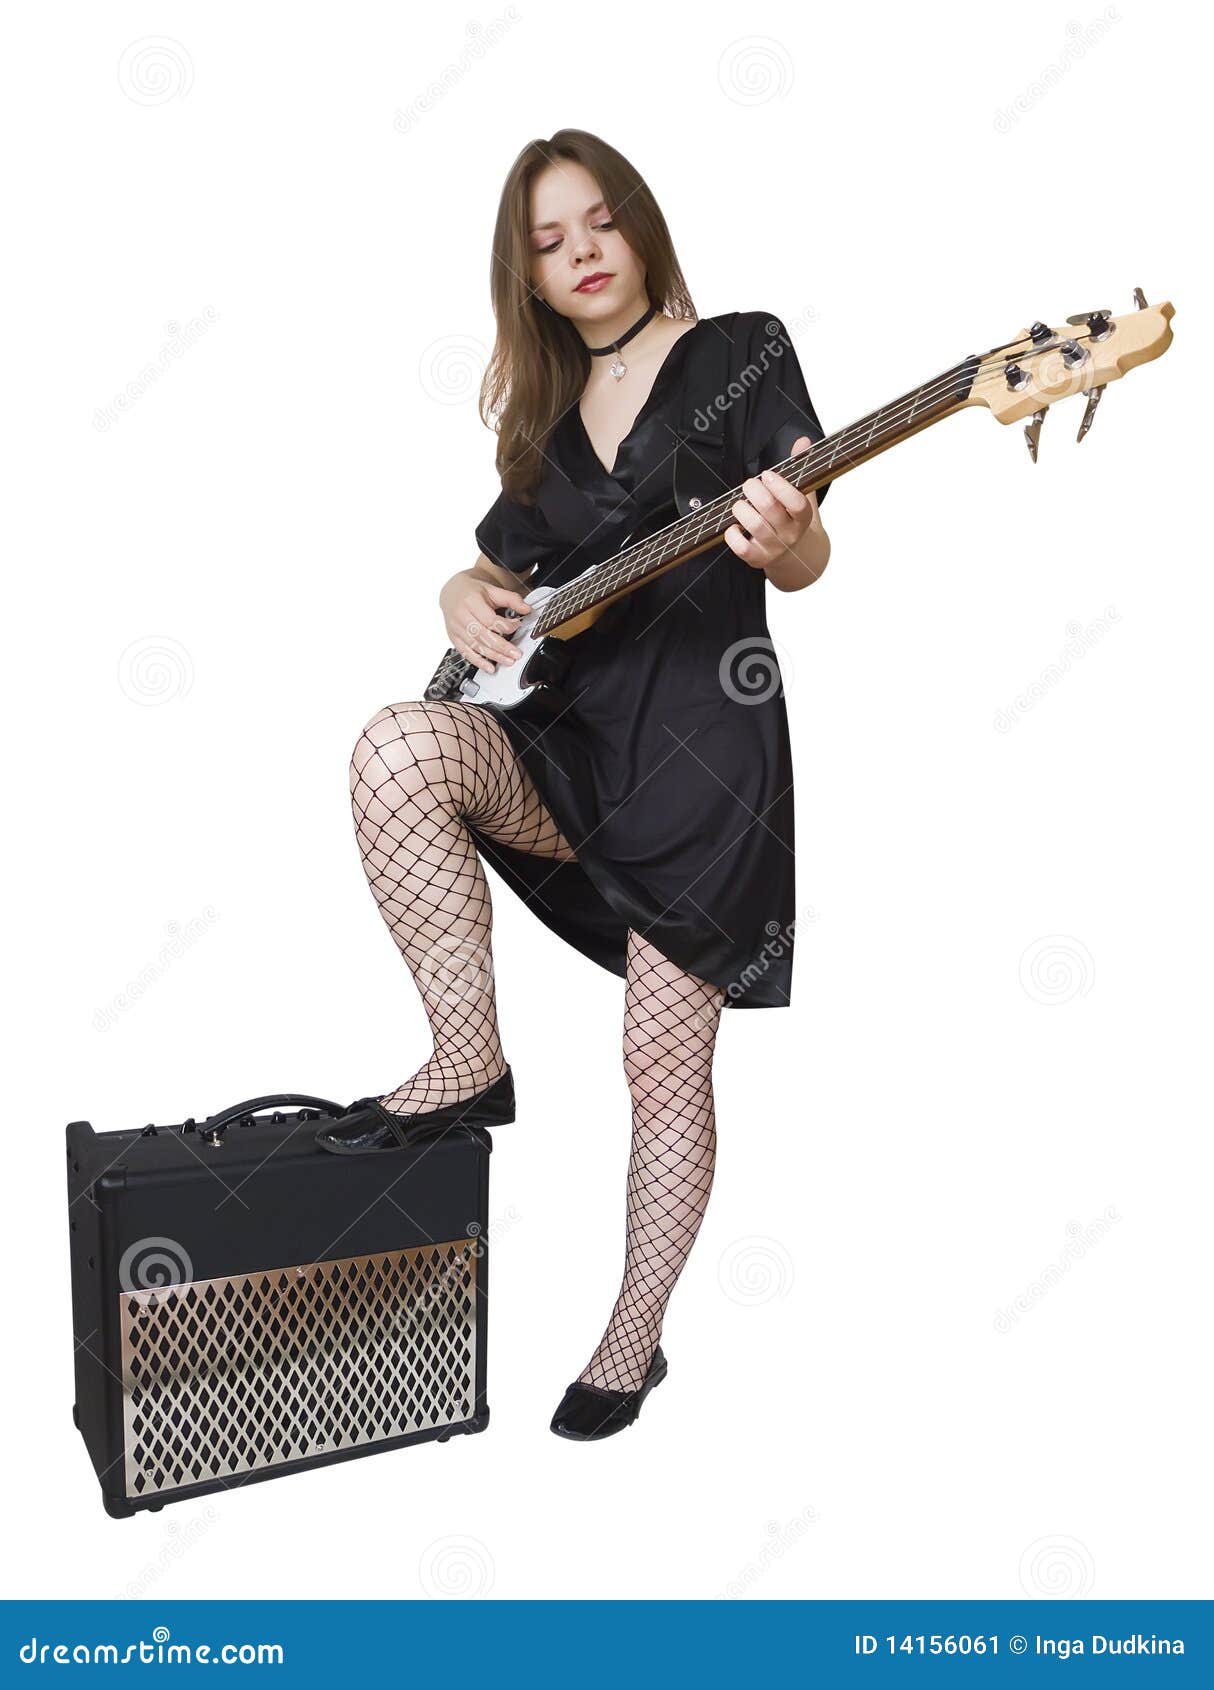 Teen girl standing with electric bass guitar.